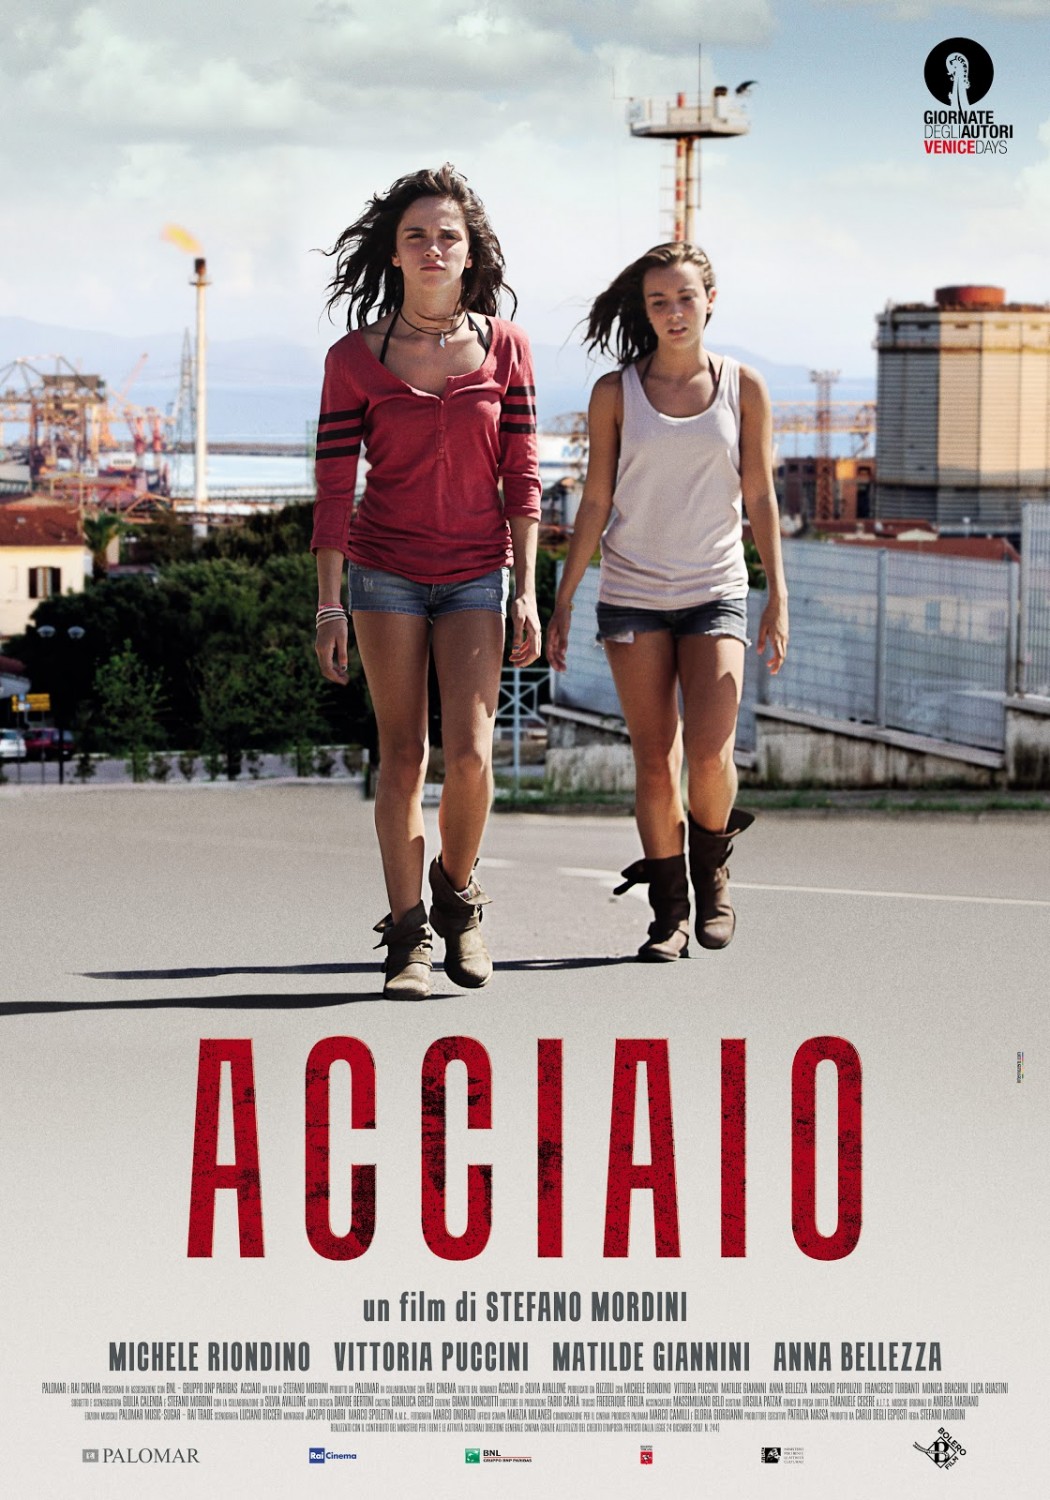 Extra Large Movie Poster Image for Acciaio 